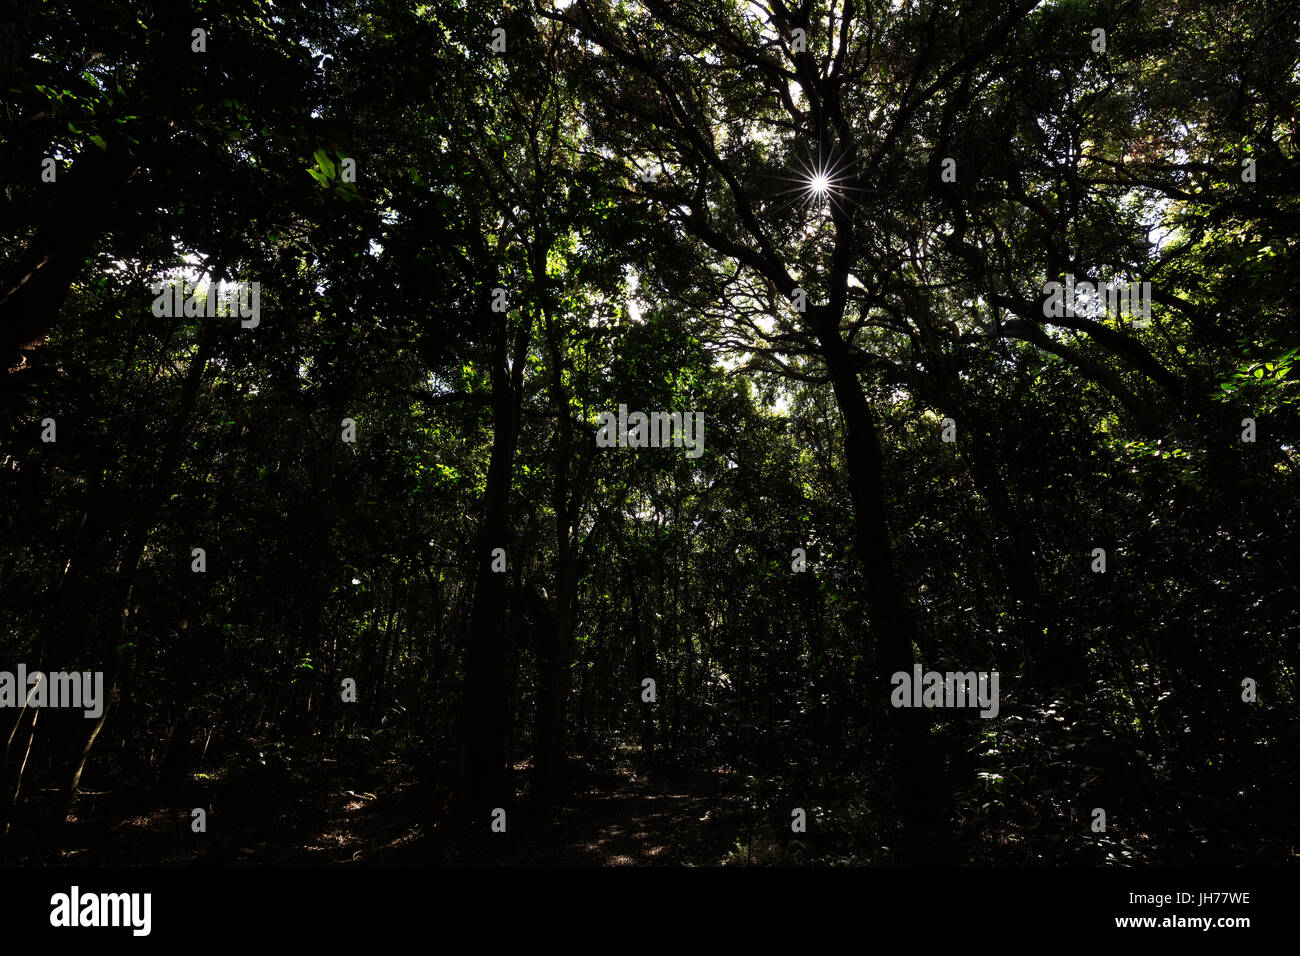 The sun shines through the tree tops into a dark jungle with towering trees. Stock Photo